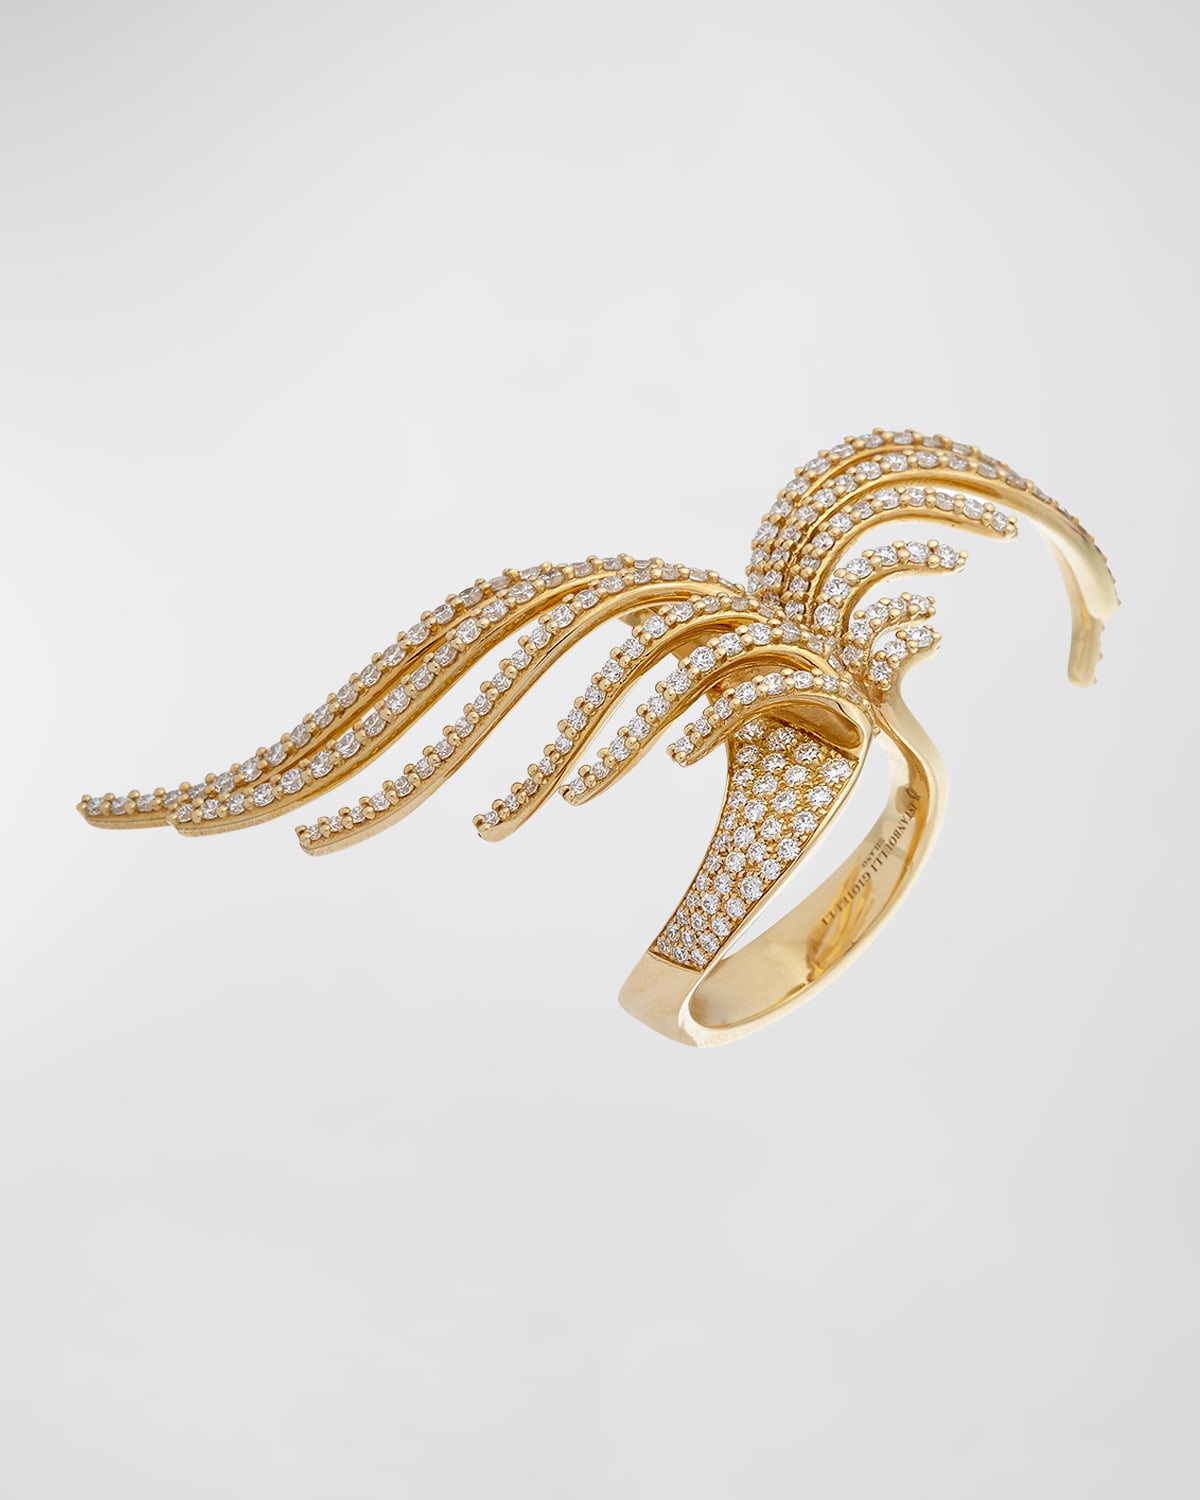 Krisonia 18k Yellow Gold Ring With Pave Diamond Wings